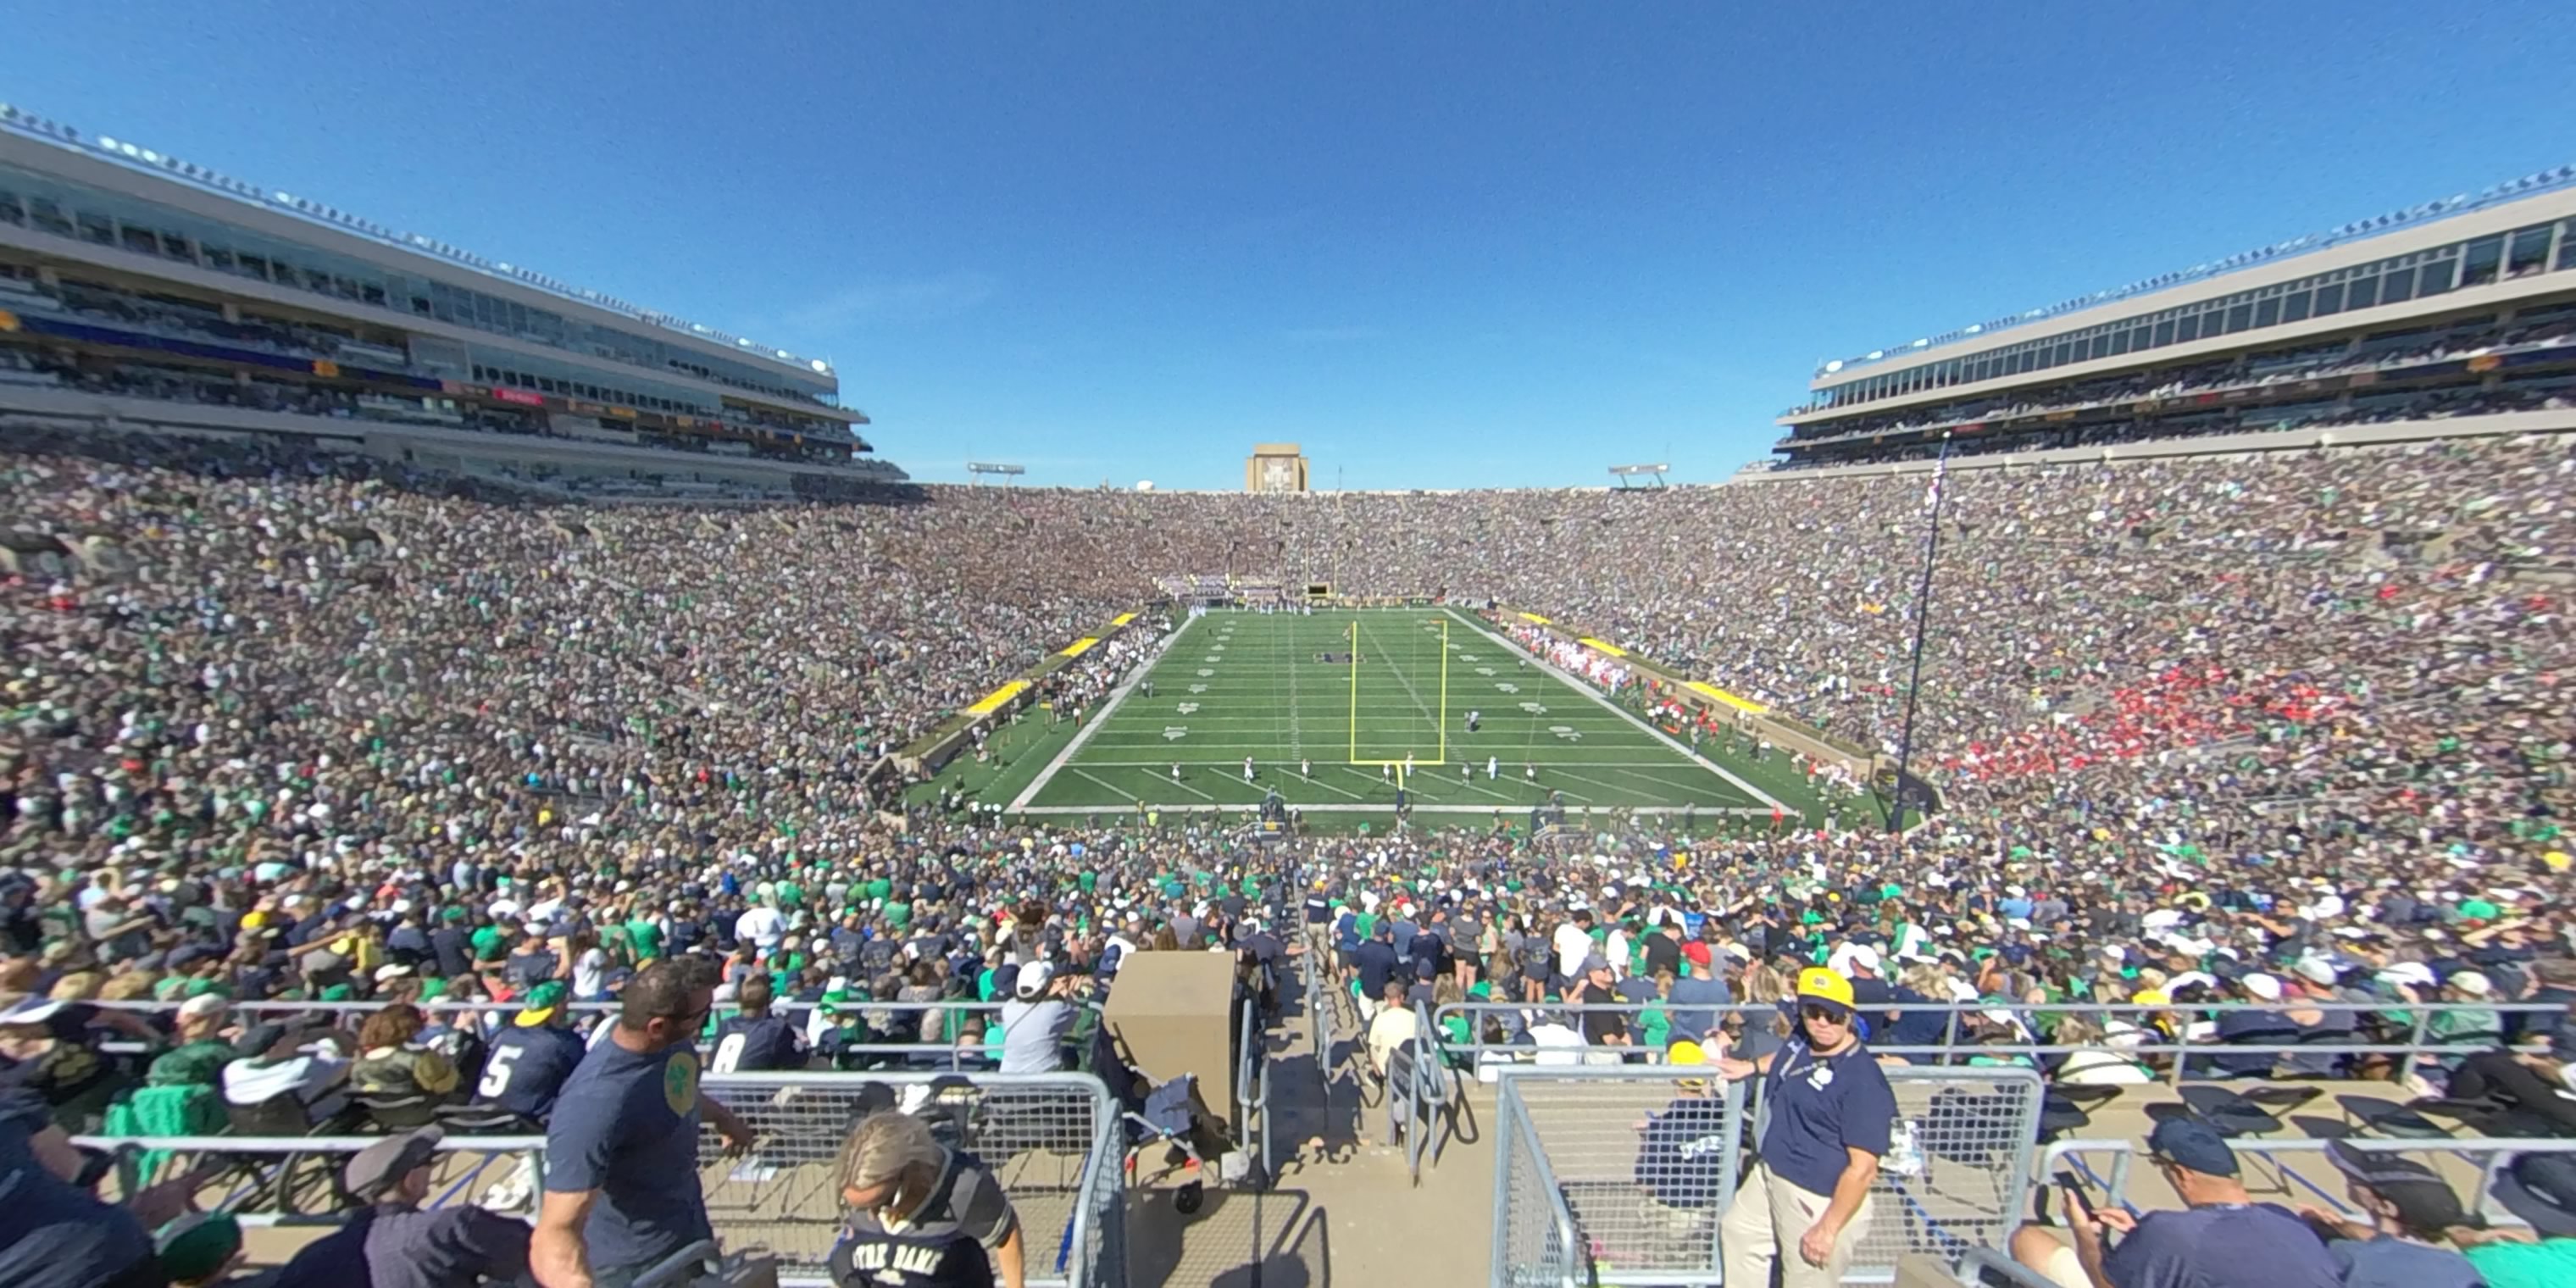 section 119 panoramic seat view  - notre dame stadium